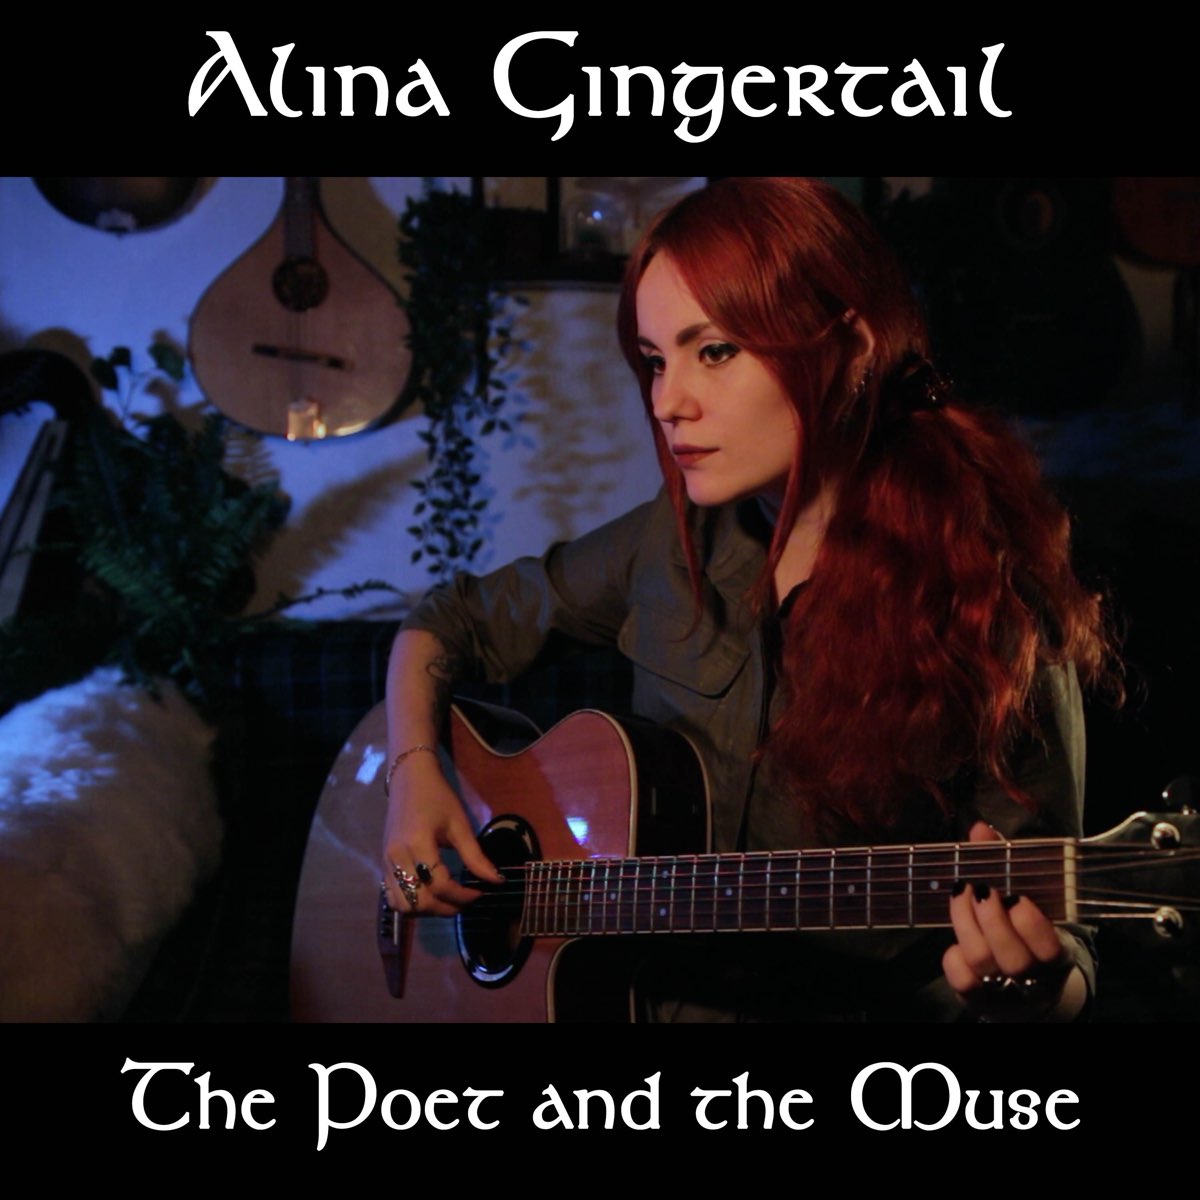 The Poet and the Muse (Cover) - Single by Alina Gingertail.